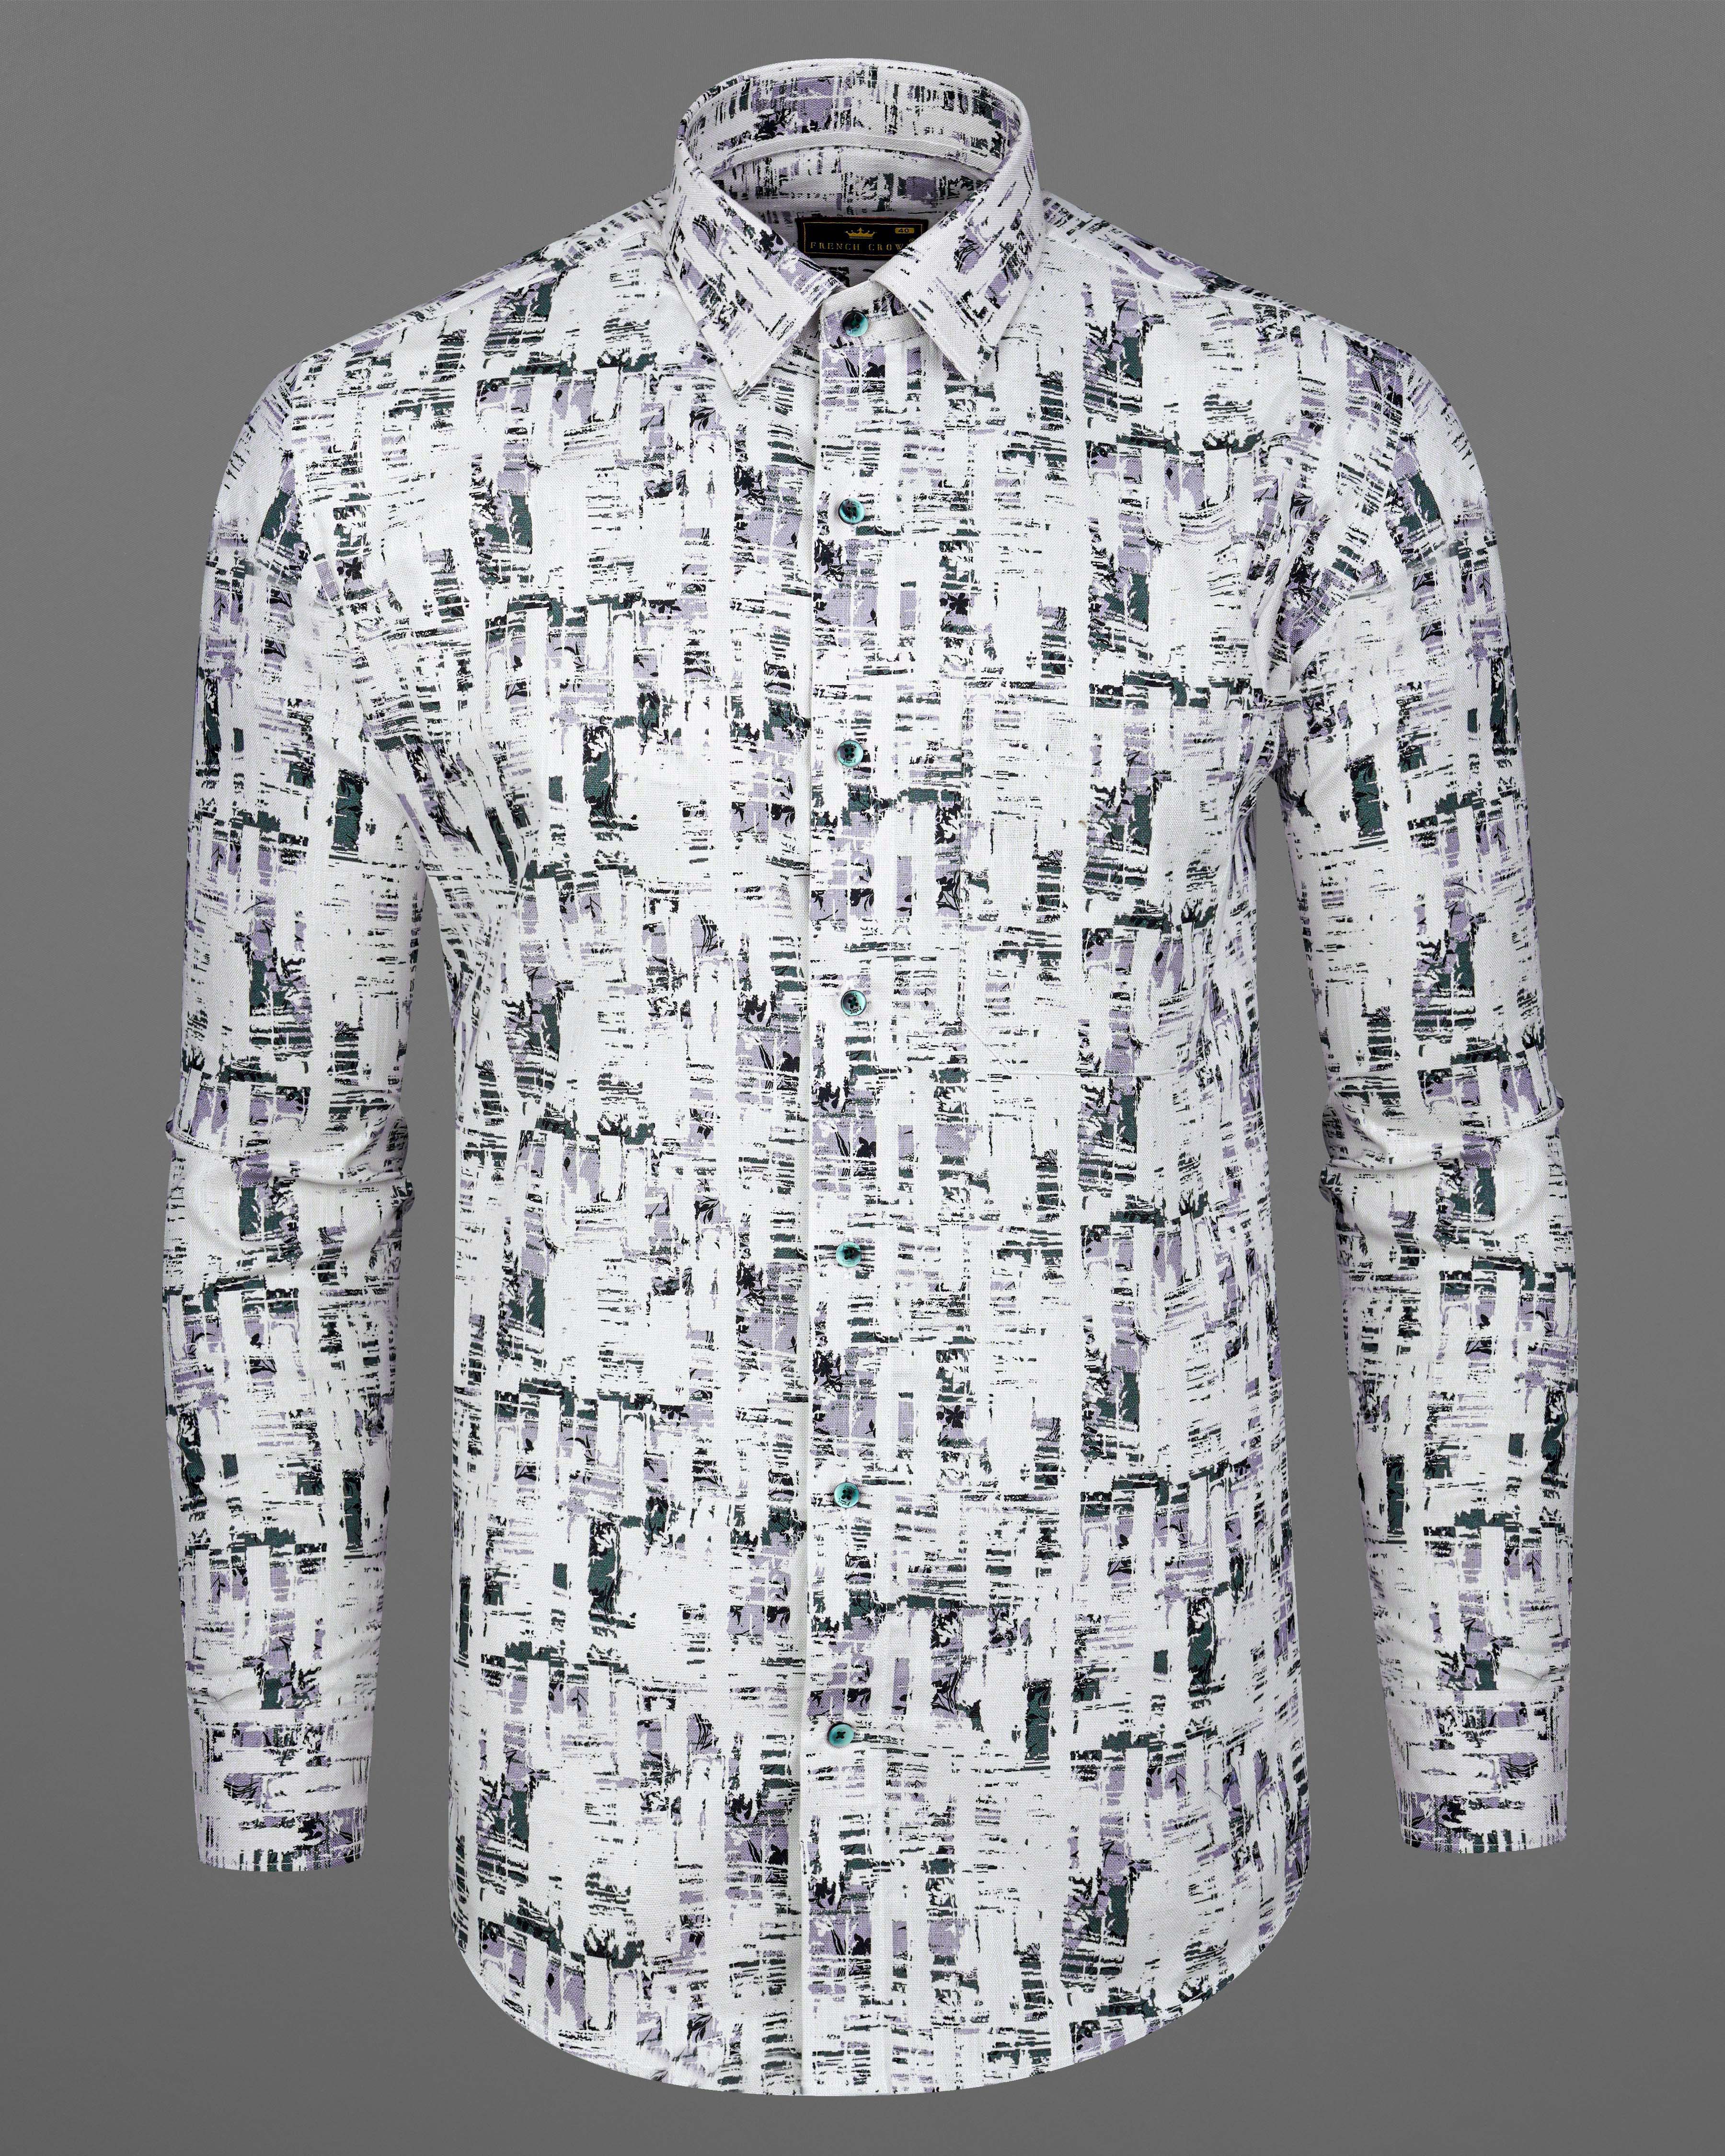 Bright White with Naveda Gray and Wisteria Blue Multicolour Printed Dobby Textured Premium Giza Cotton Shirt 8276-GR-38, 8276-GR-H-38, 8276-GR-39, 8276-GR-H-39, 8276-GR-40, 8276-GR-H-40, 8276-GR-42, 8276-GR-H-42, 8276-GR-44, 8276-GR-H-44, 8276-GR-46, 8276-GR-H-46, 8276-GR-48, 8276-GR-H-48, 8276-GR-50, 8276-GR-H-50, 8276-GR-52, 8276-GR-H-52